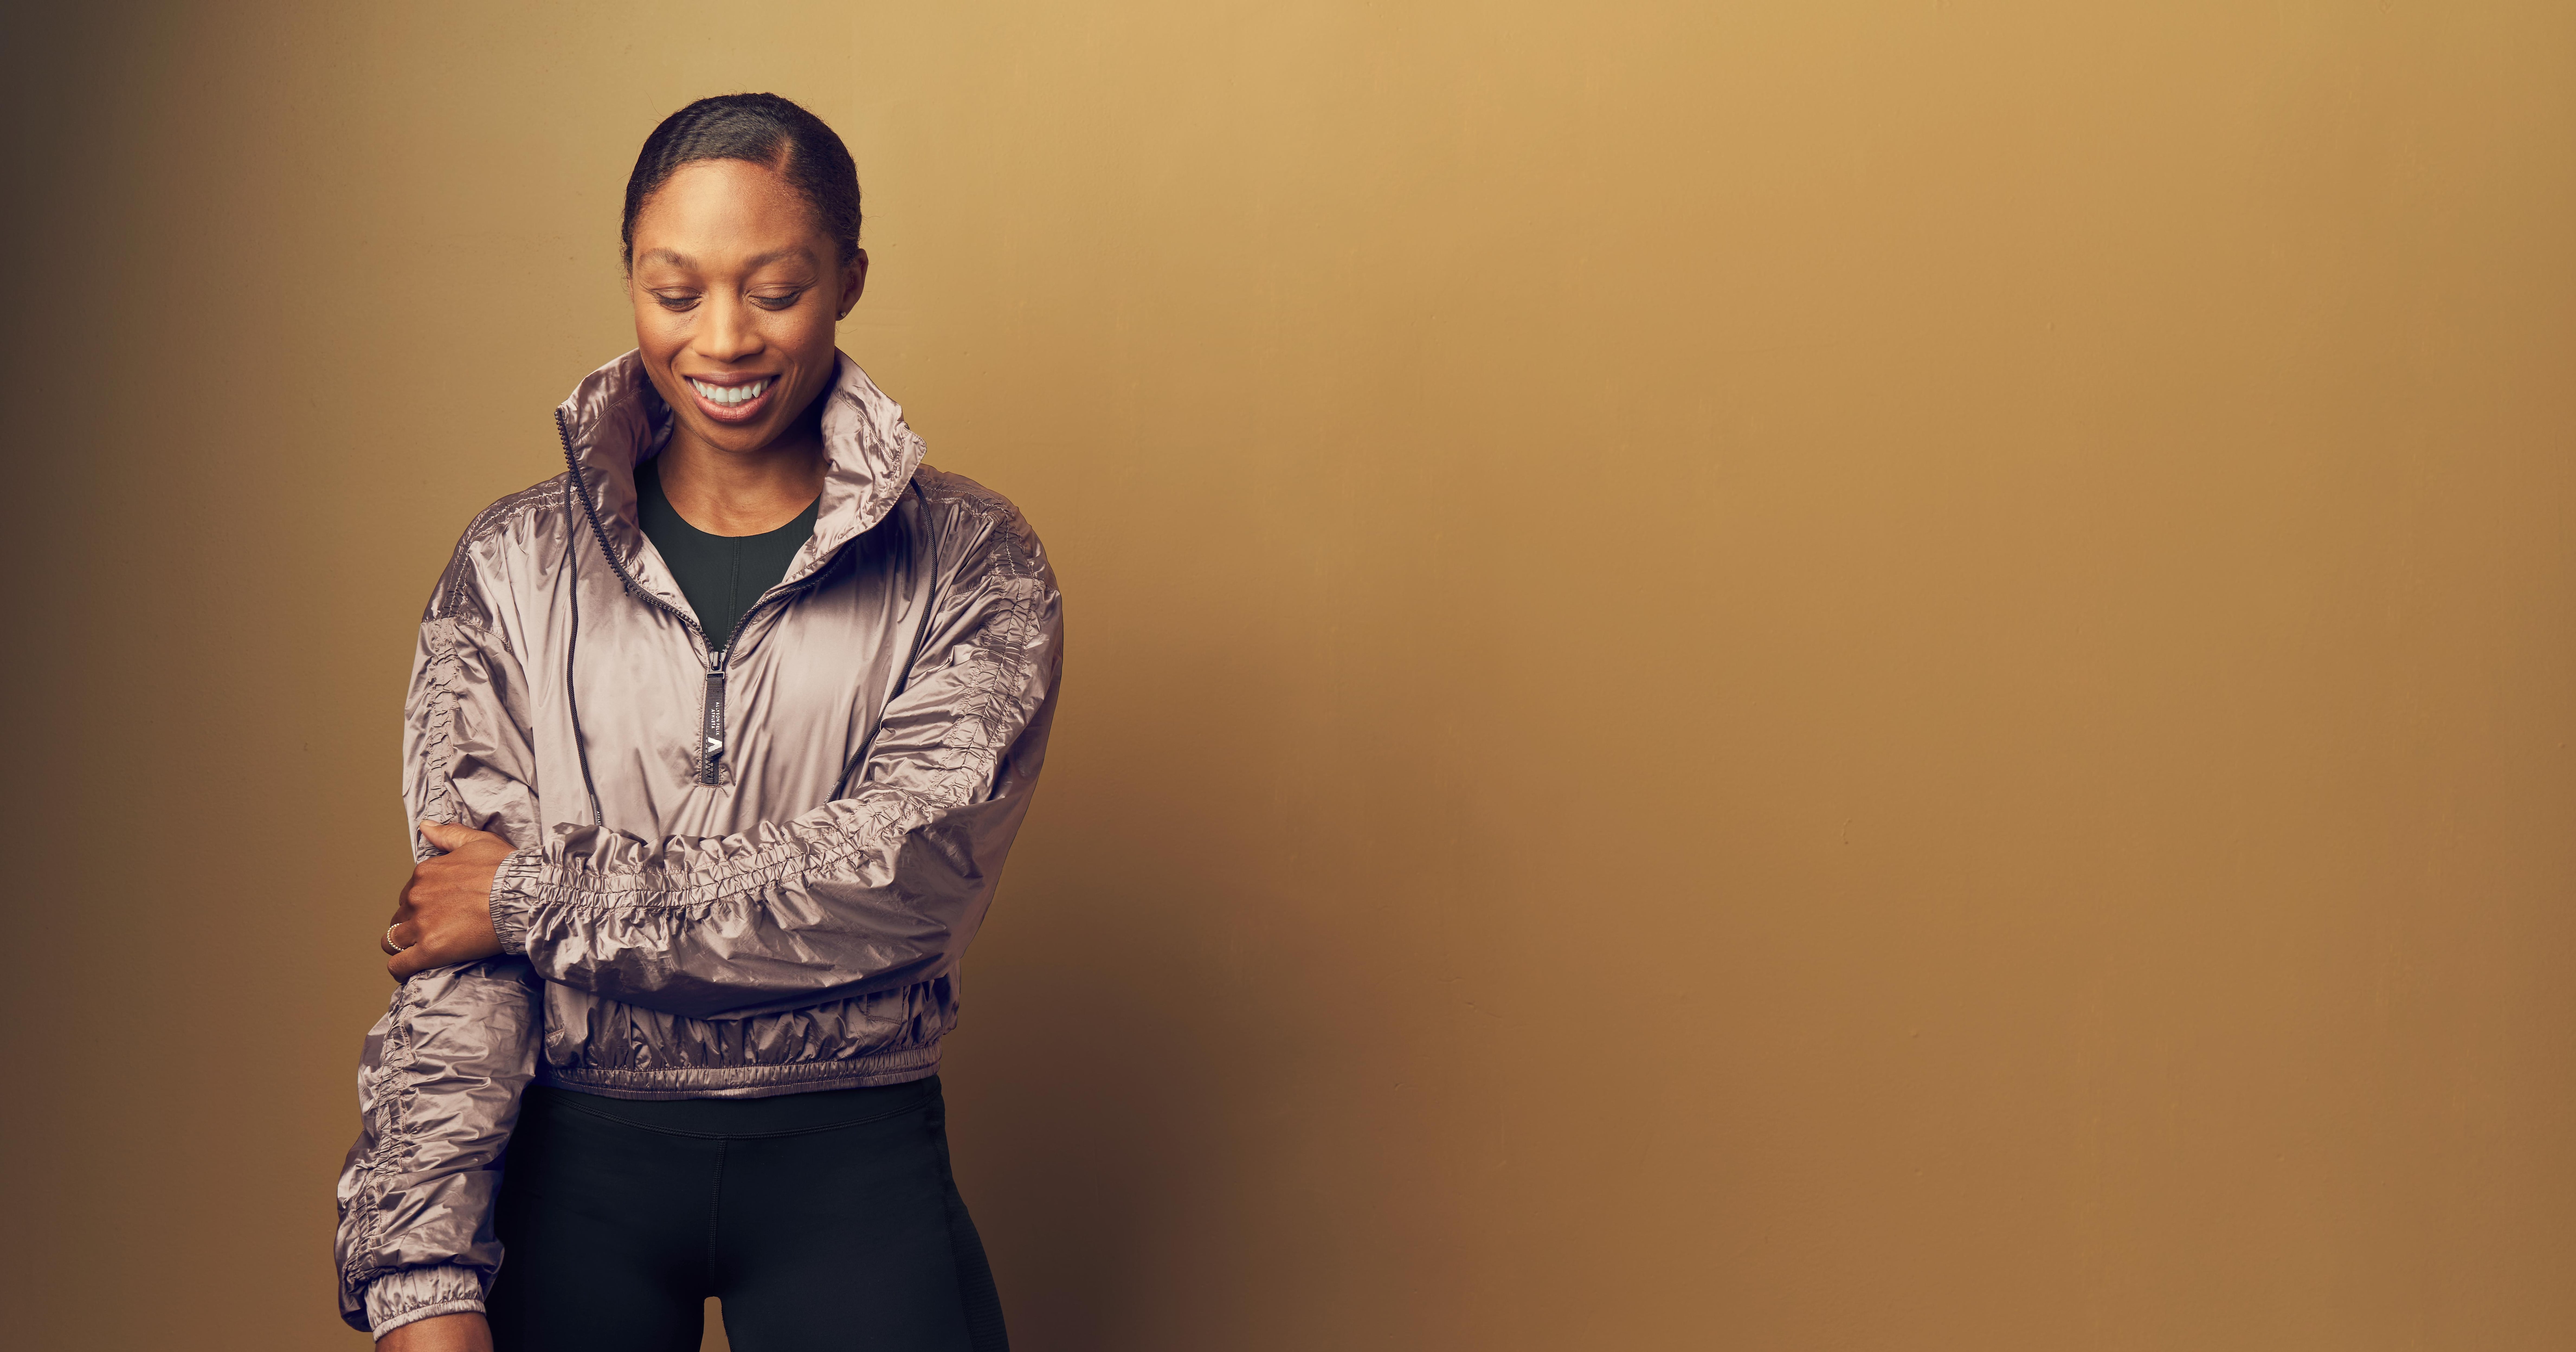 Athleta Model-Athlete Profile: Aline's Journey from the Runway to